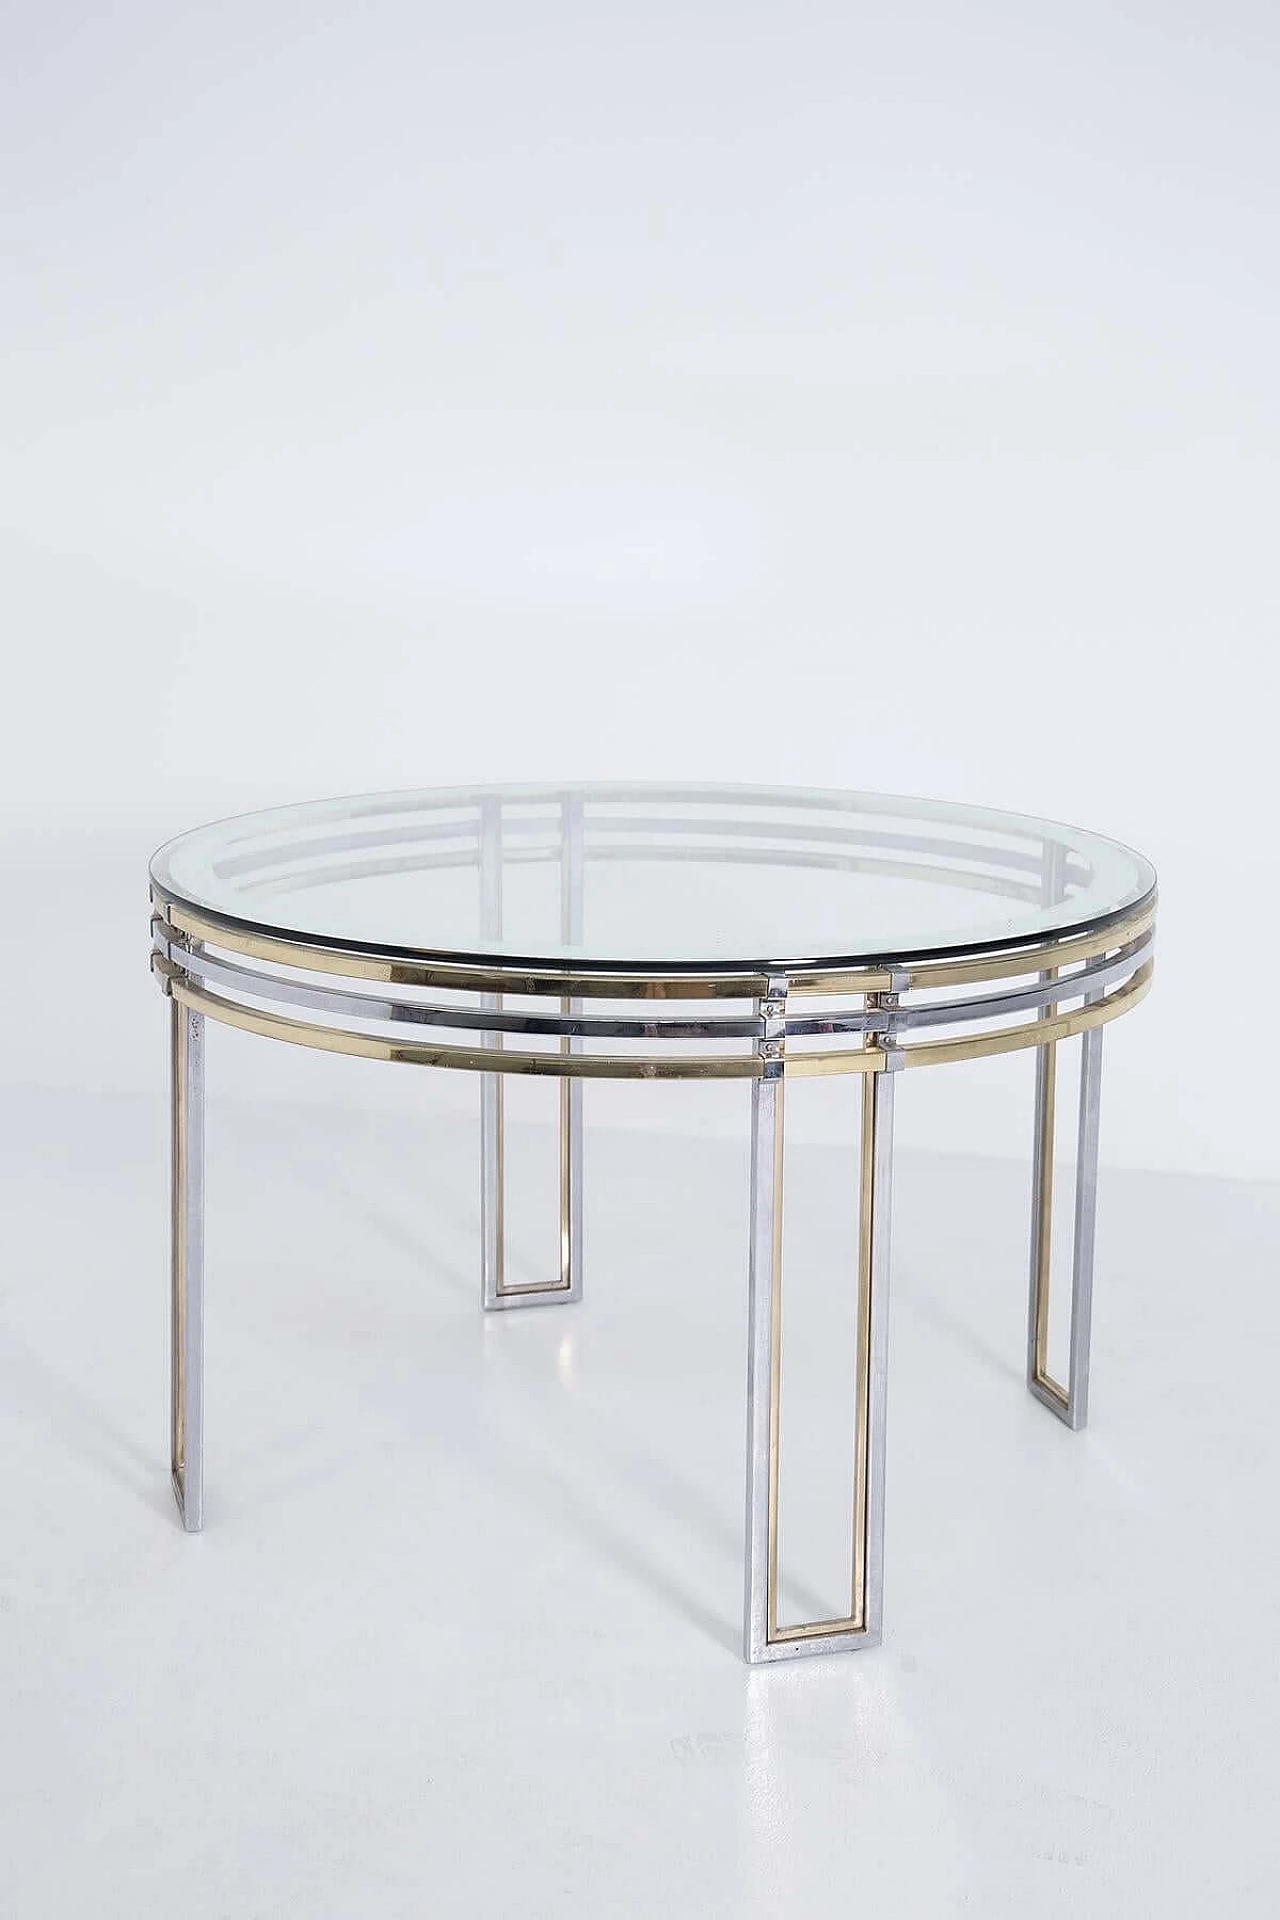 Romeo Rega's round dining table in brass, steel and decorated glass, 1970s 1382585